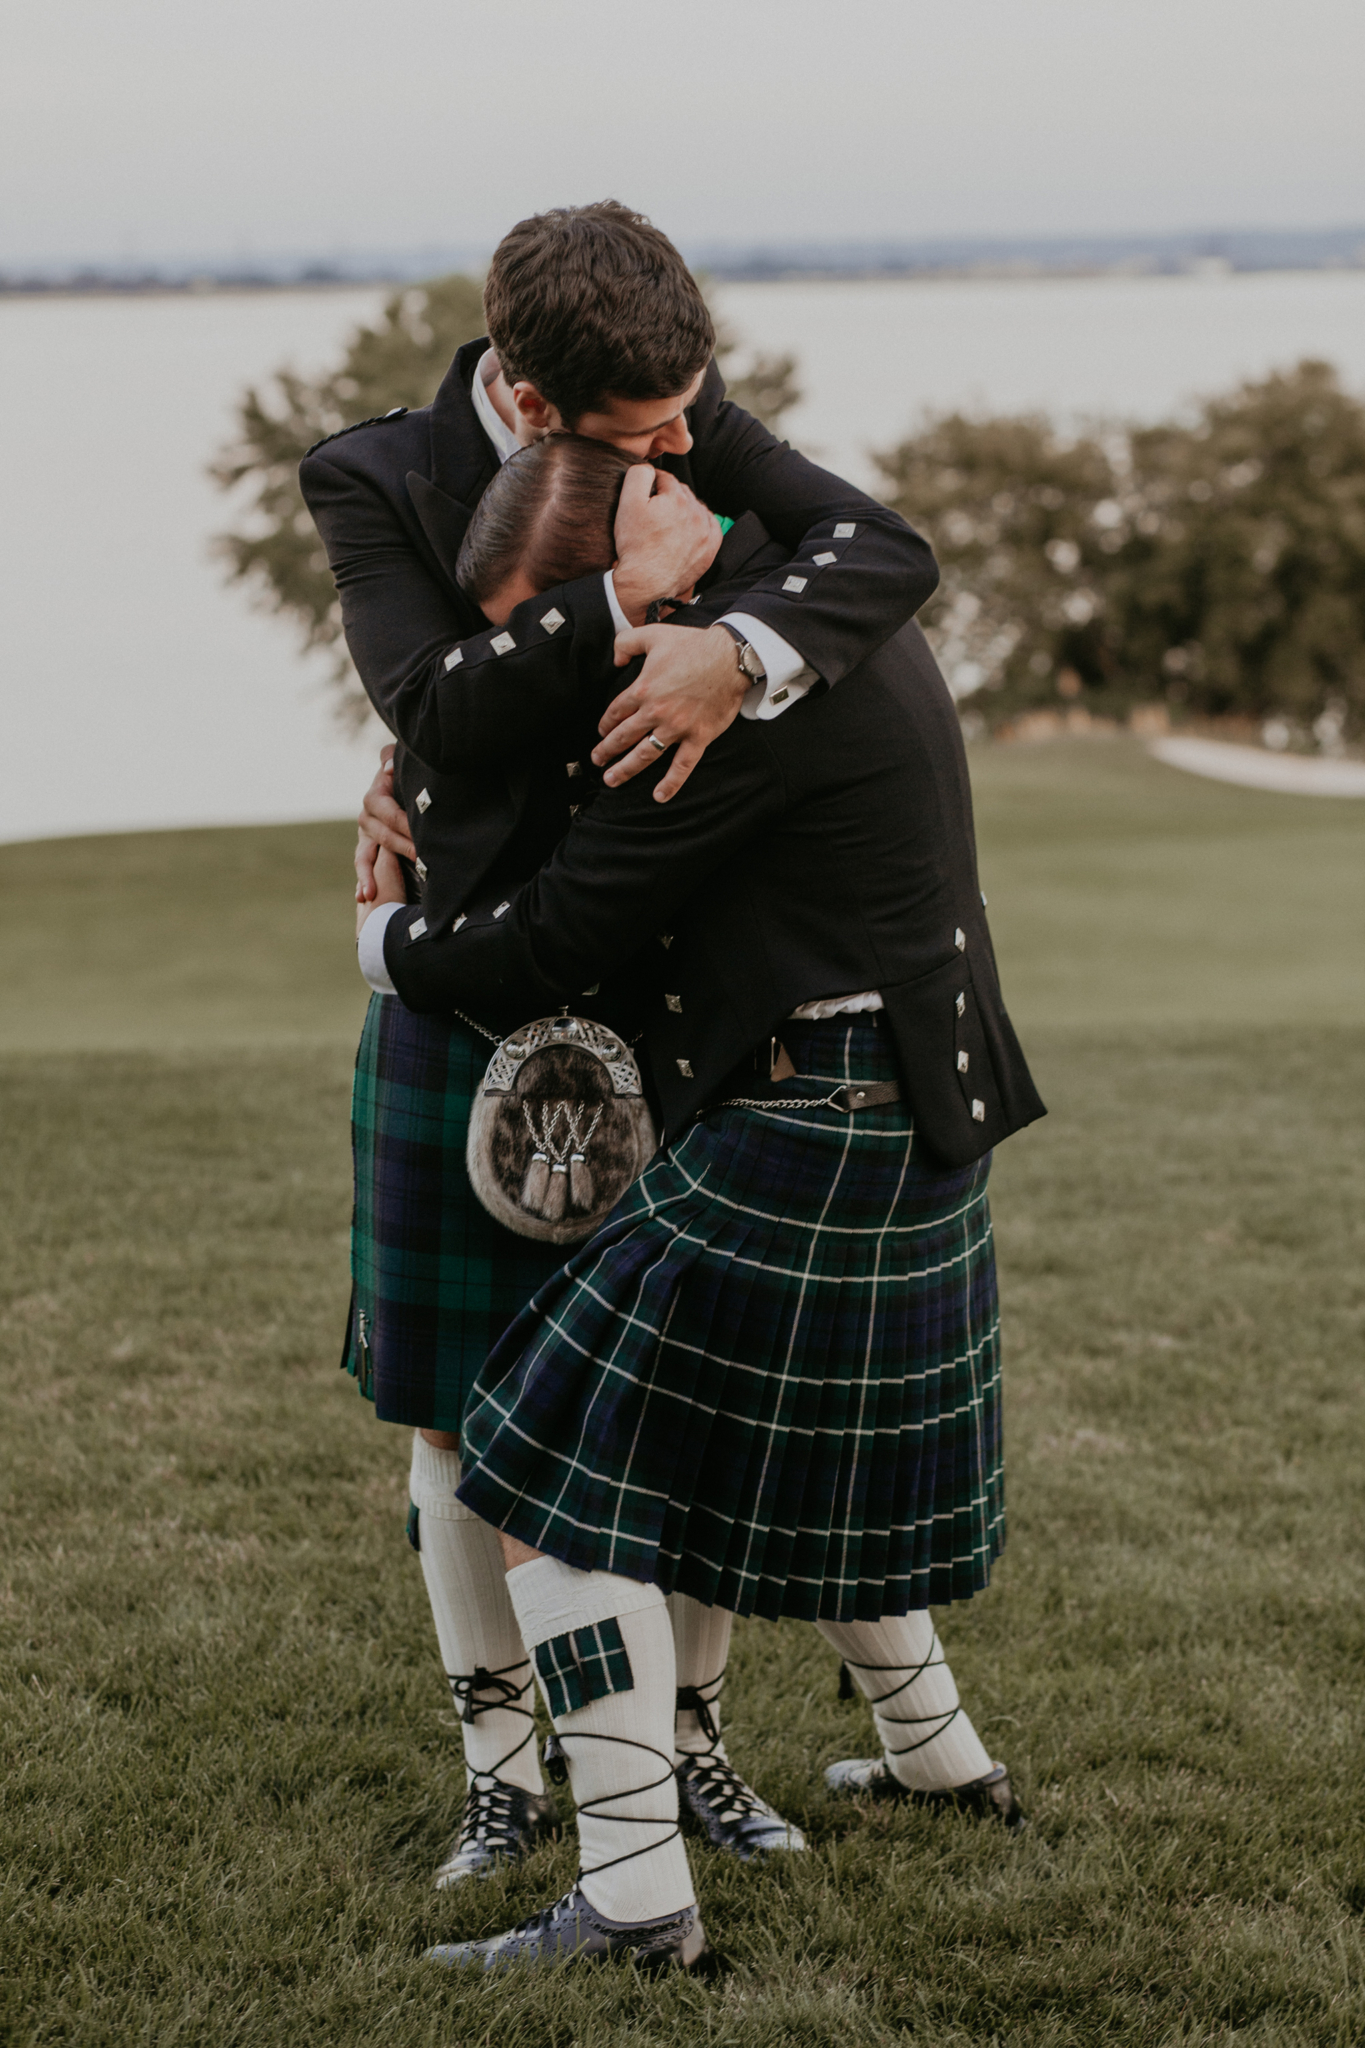 Documentary wedding photo candid of groom with best man hugging